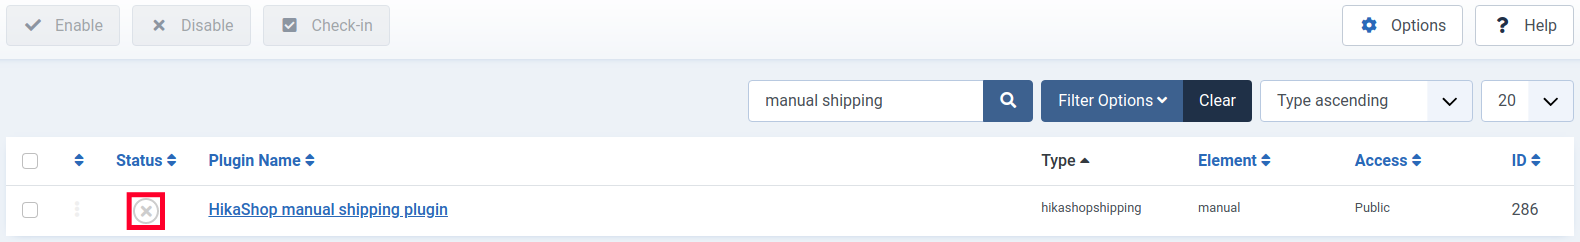 Activate Manual Shipping in HikaShop